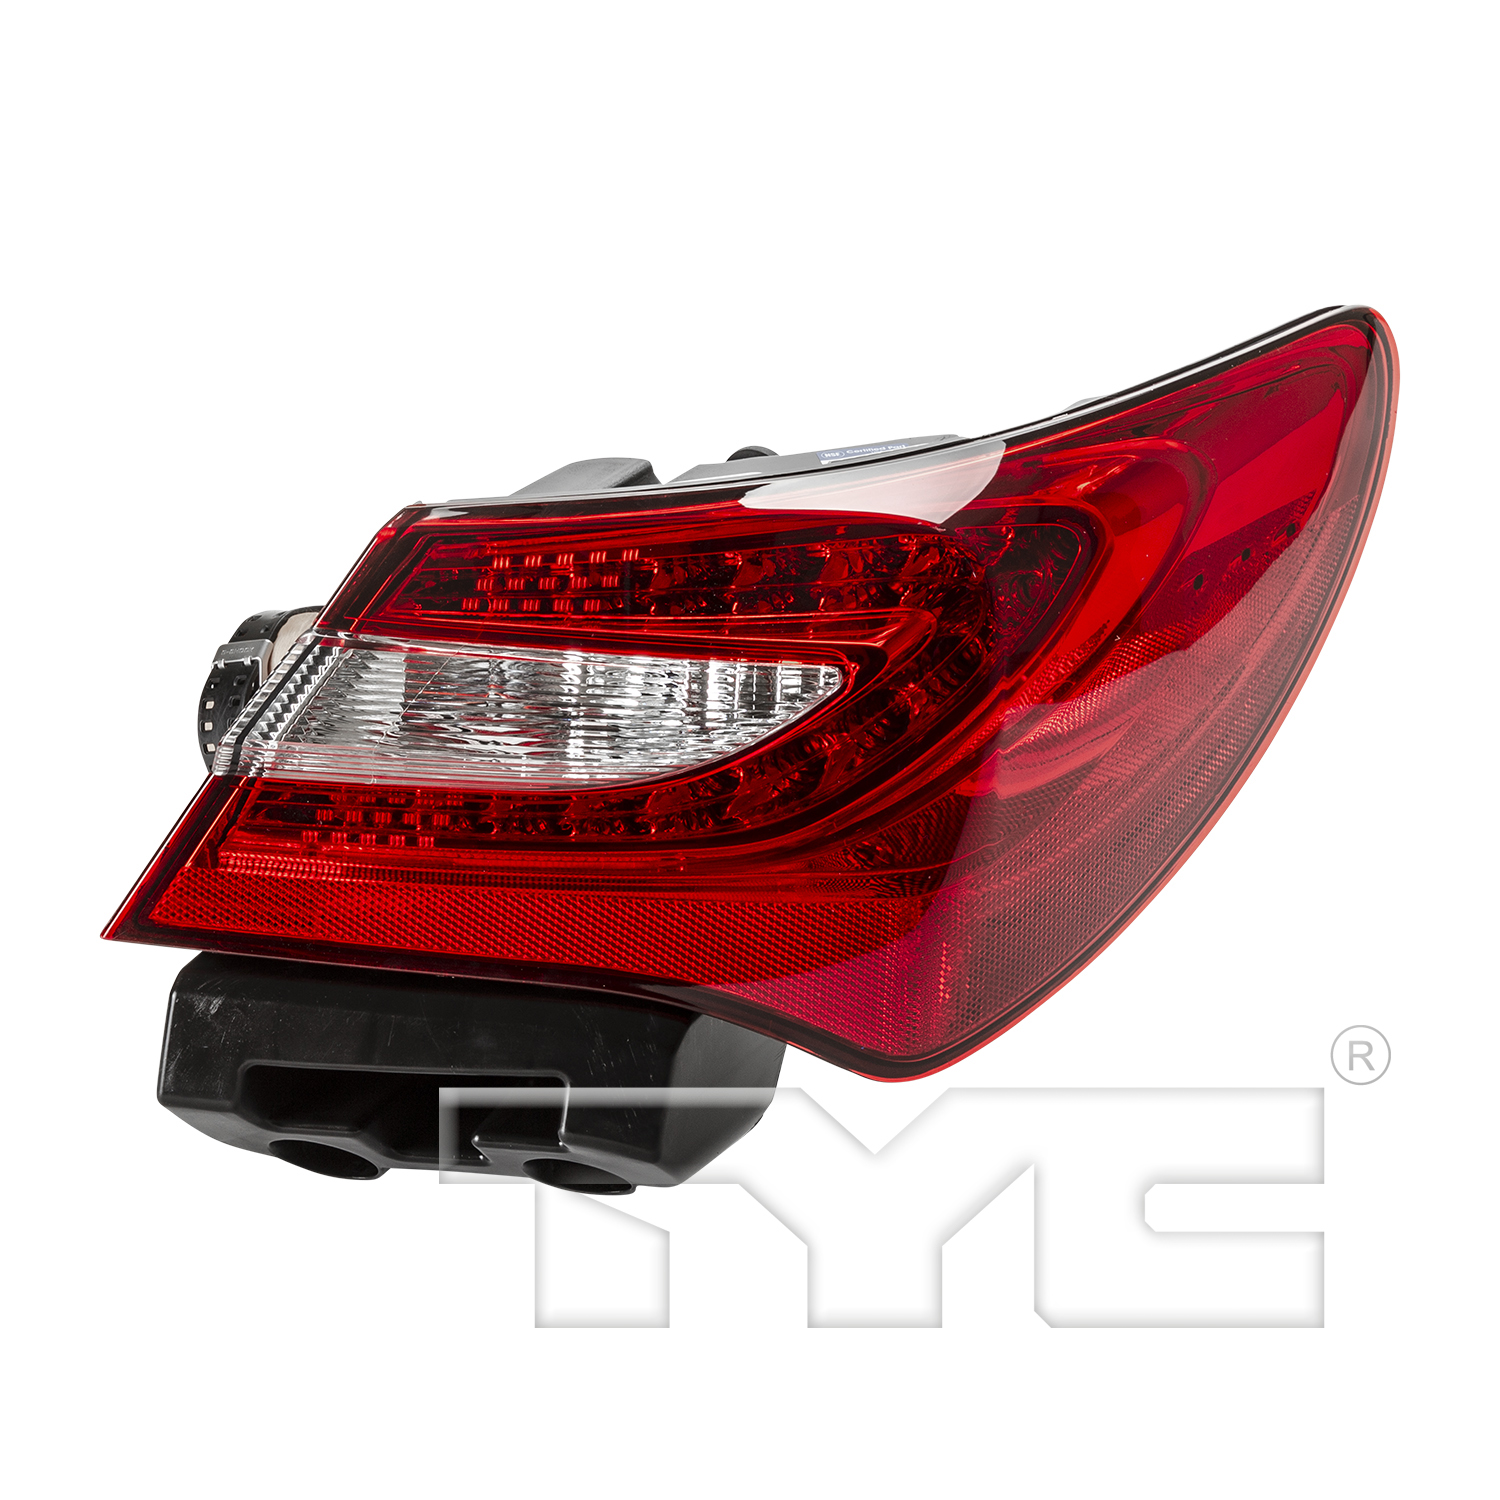 Aftermarket TAILLIGHTS for CHRYSLER - 200, 200,11-14,RT Taillamp lens/housing